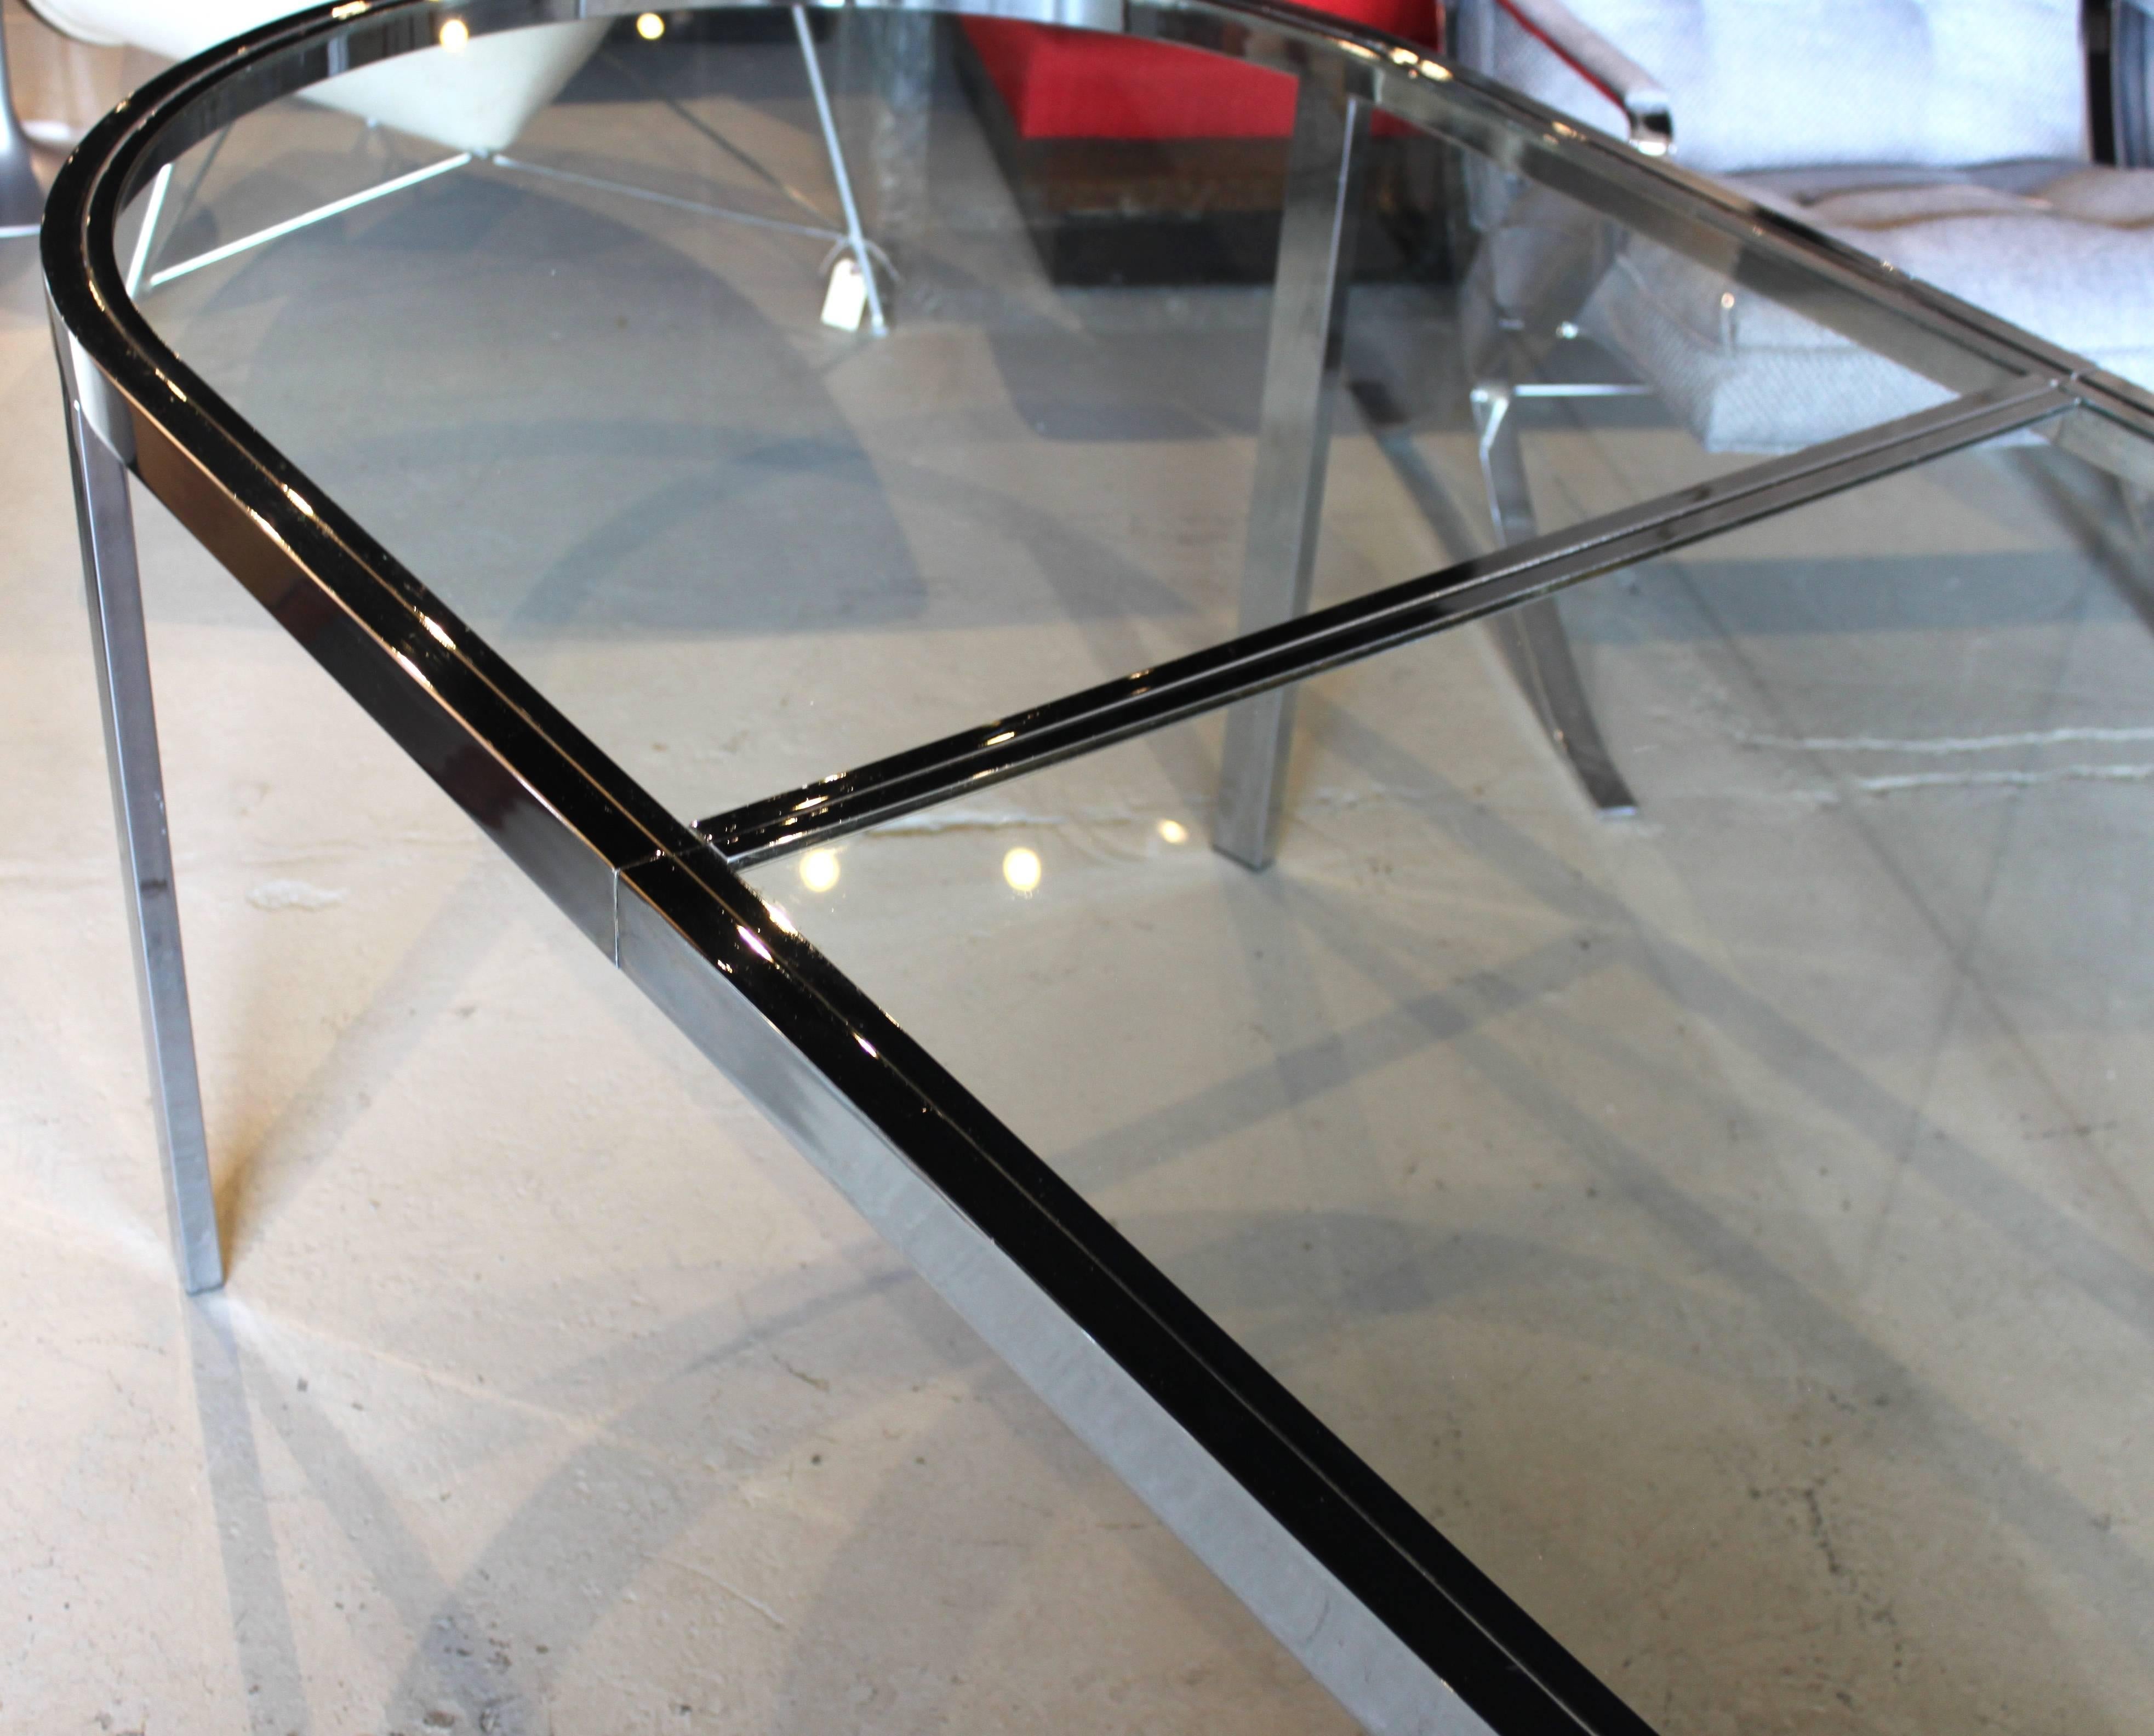 Design Institute of America. Glass and chrome racetrack dining table.

Without leaves: 80.5" long.
With one leaf: 95.5" long.
With two leaves: 110.5" long.

(Each leaf = 15").